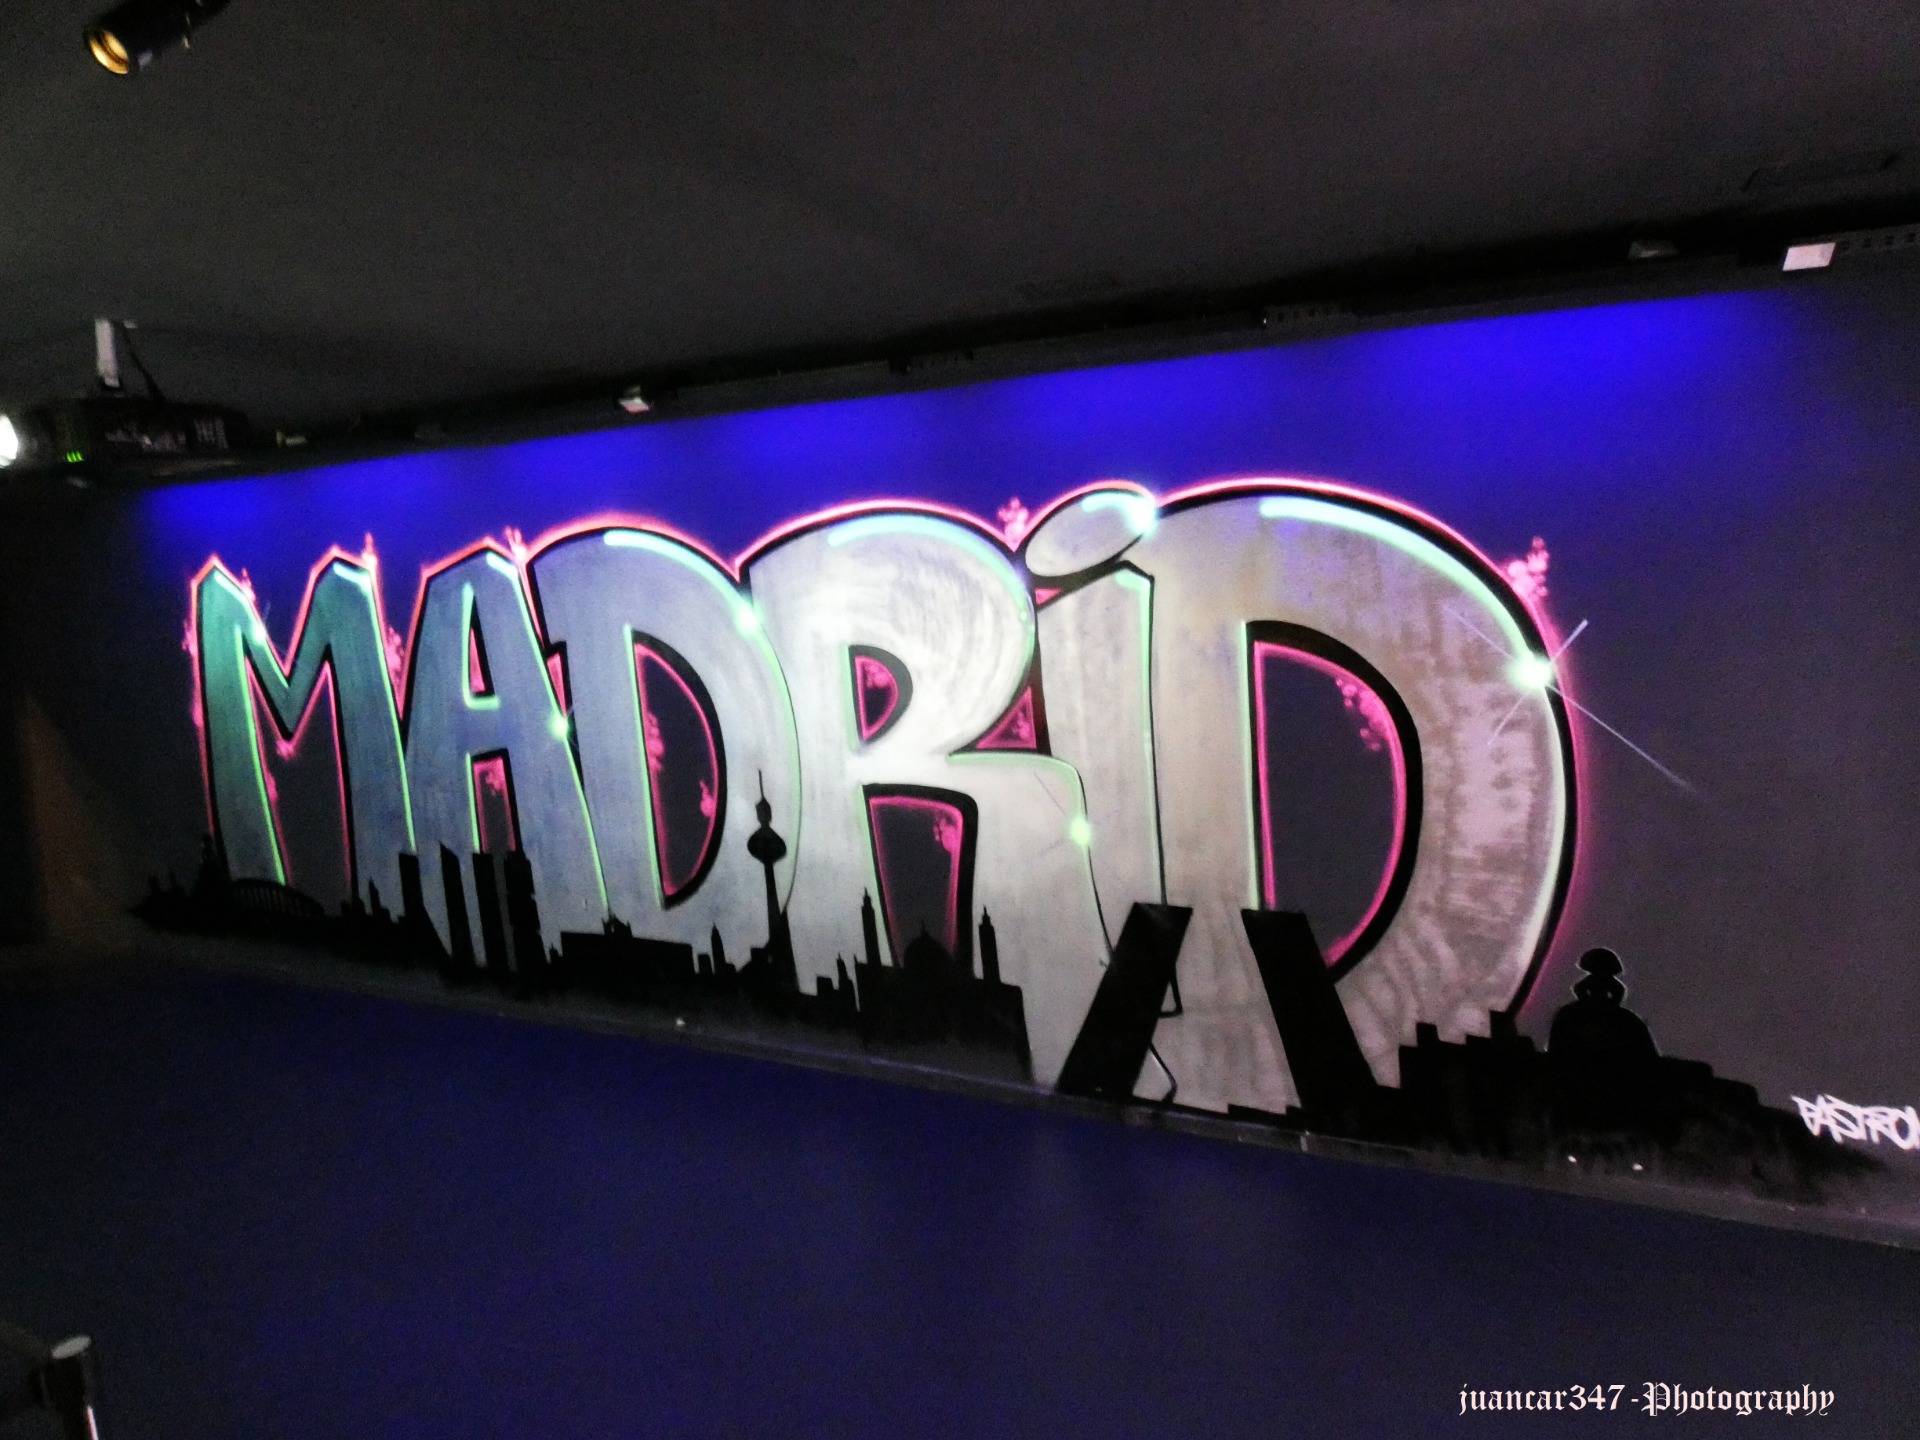 Madrid welcomes you